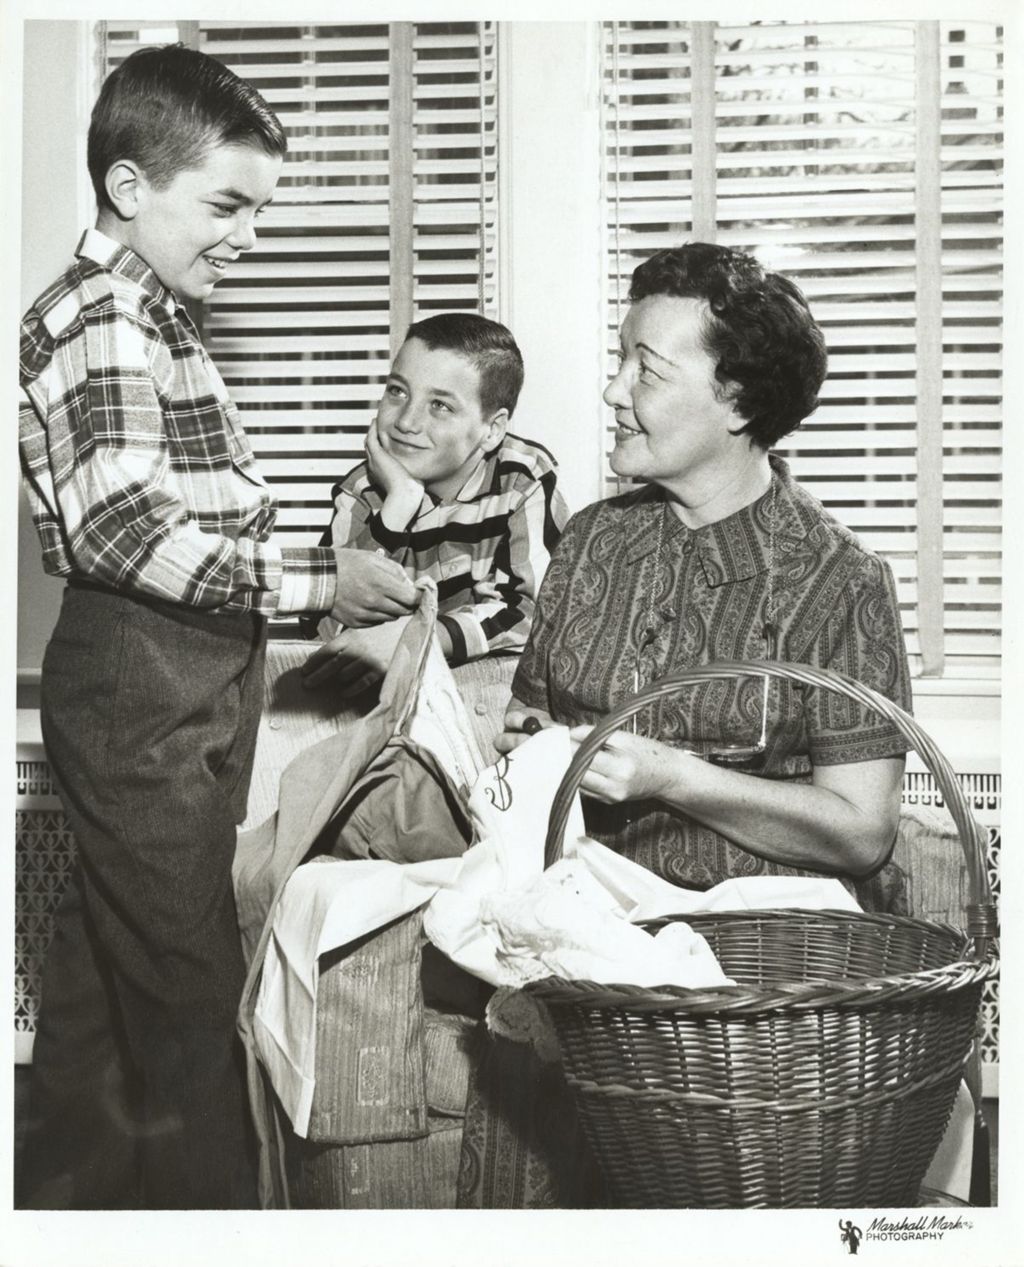 Miniature of Eleanor Daley folding laundry with her sons